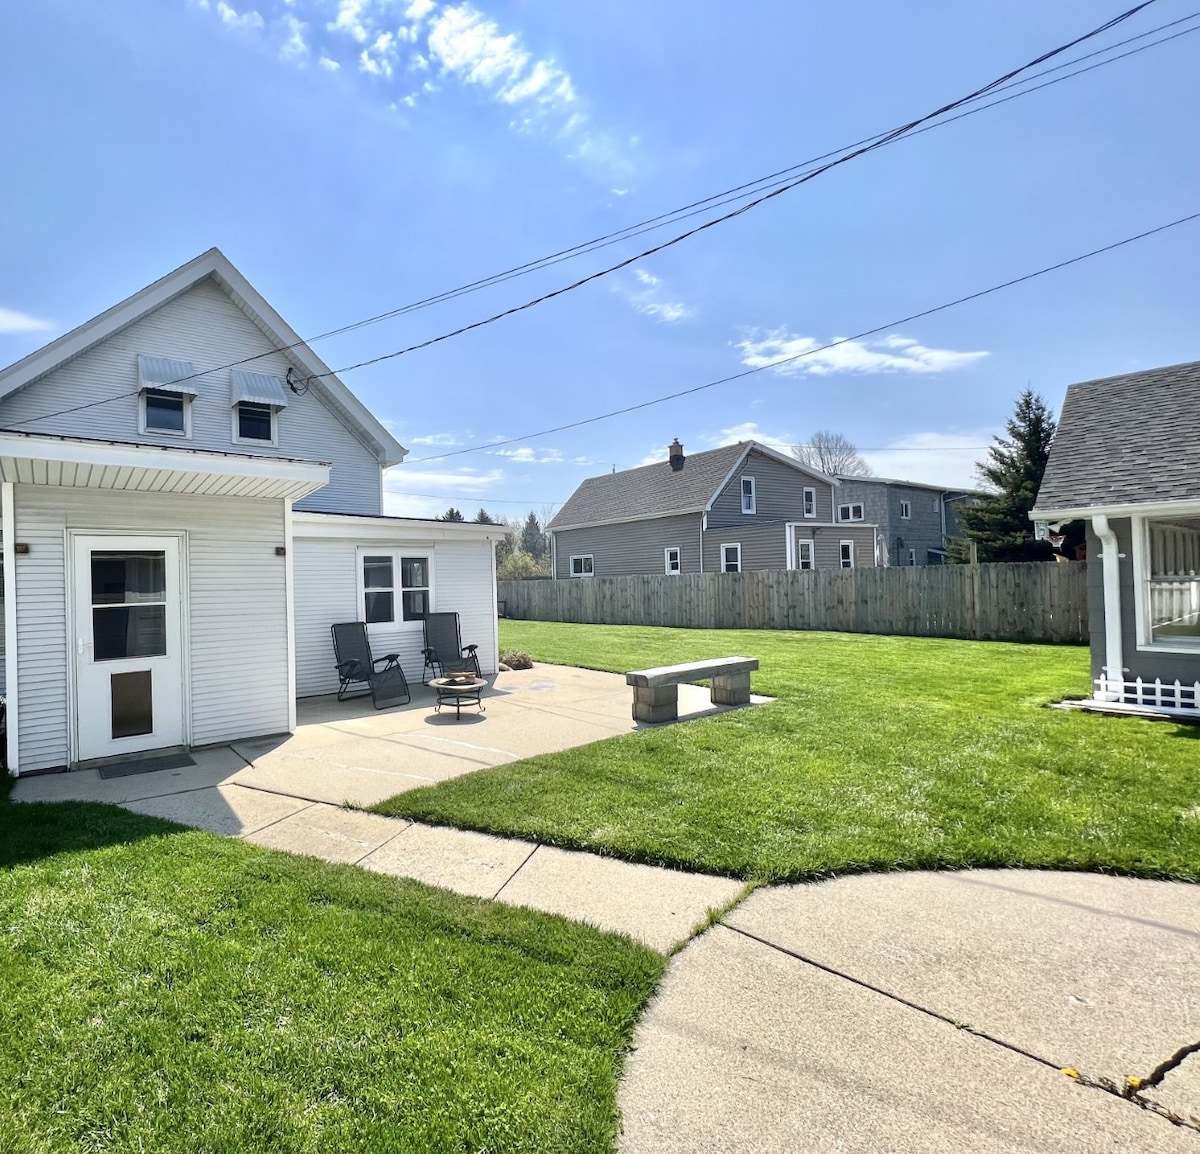 3BR Home in Milwaukee - near airport & downtown